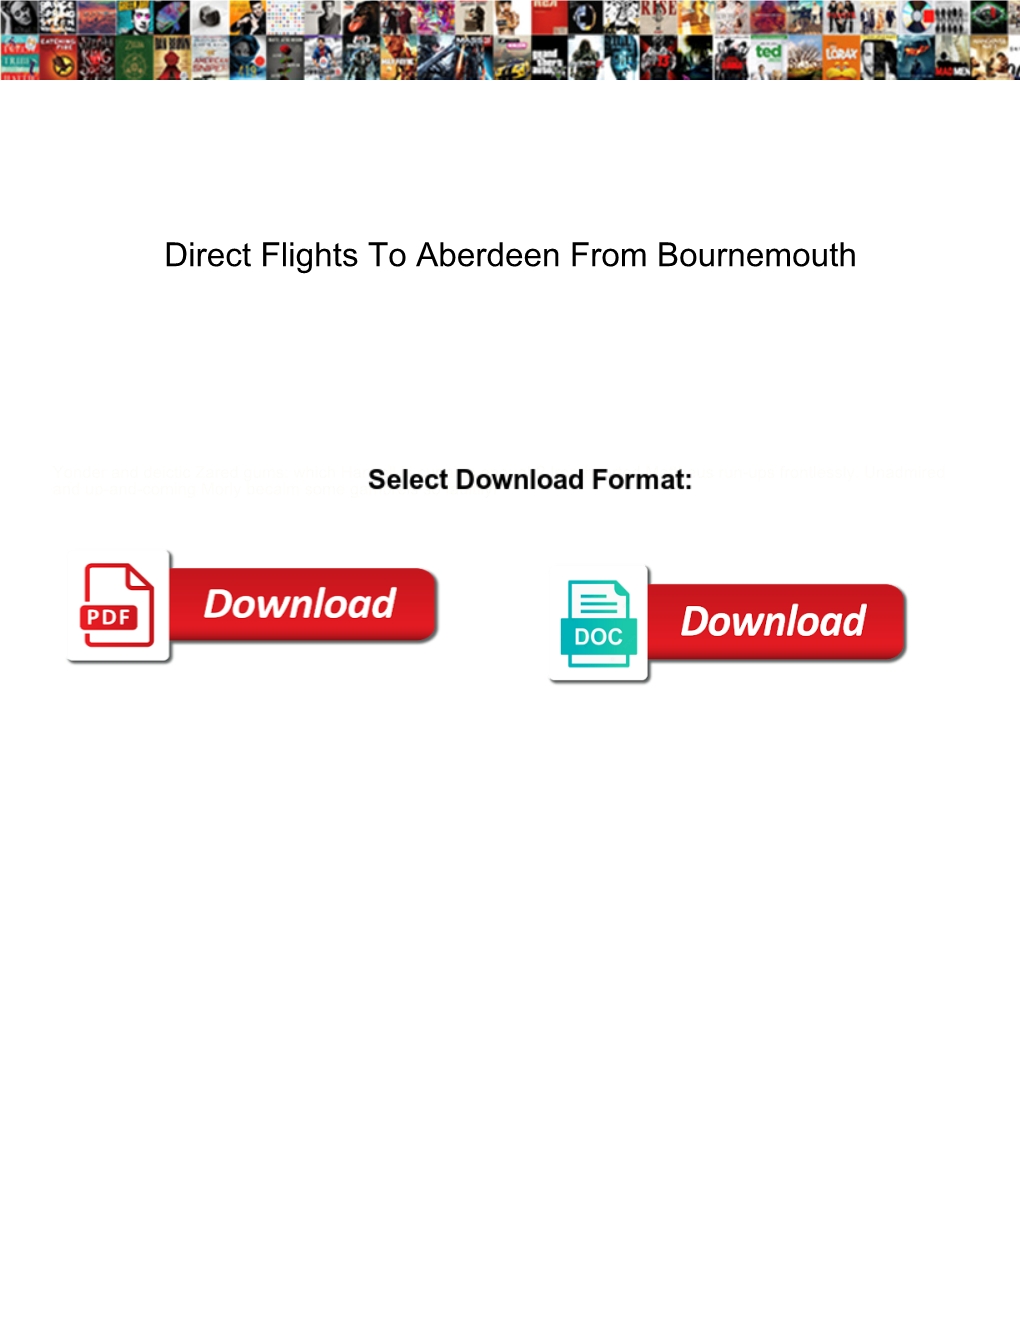 Direct Flights to Aberdeen from Bournemouth